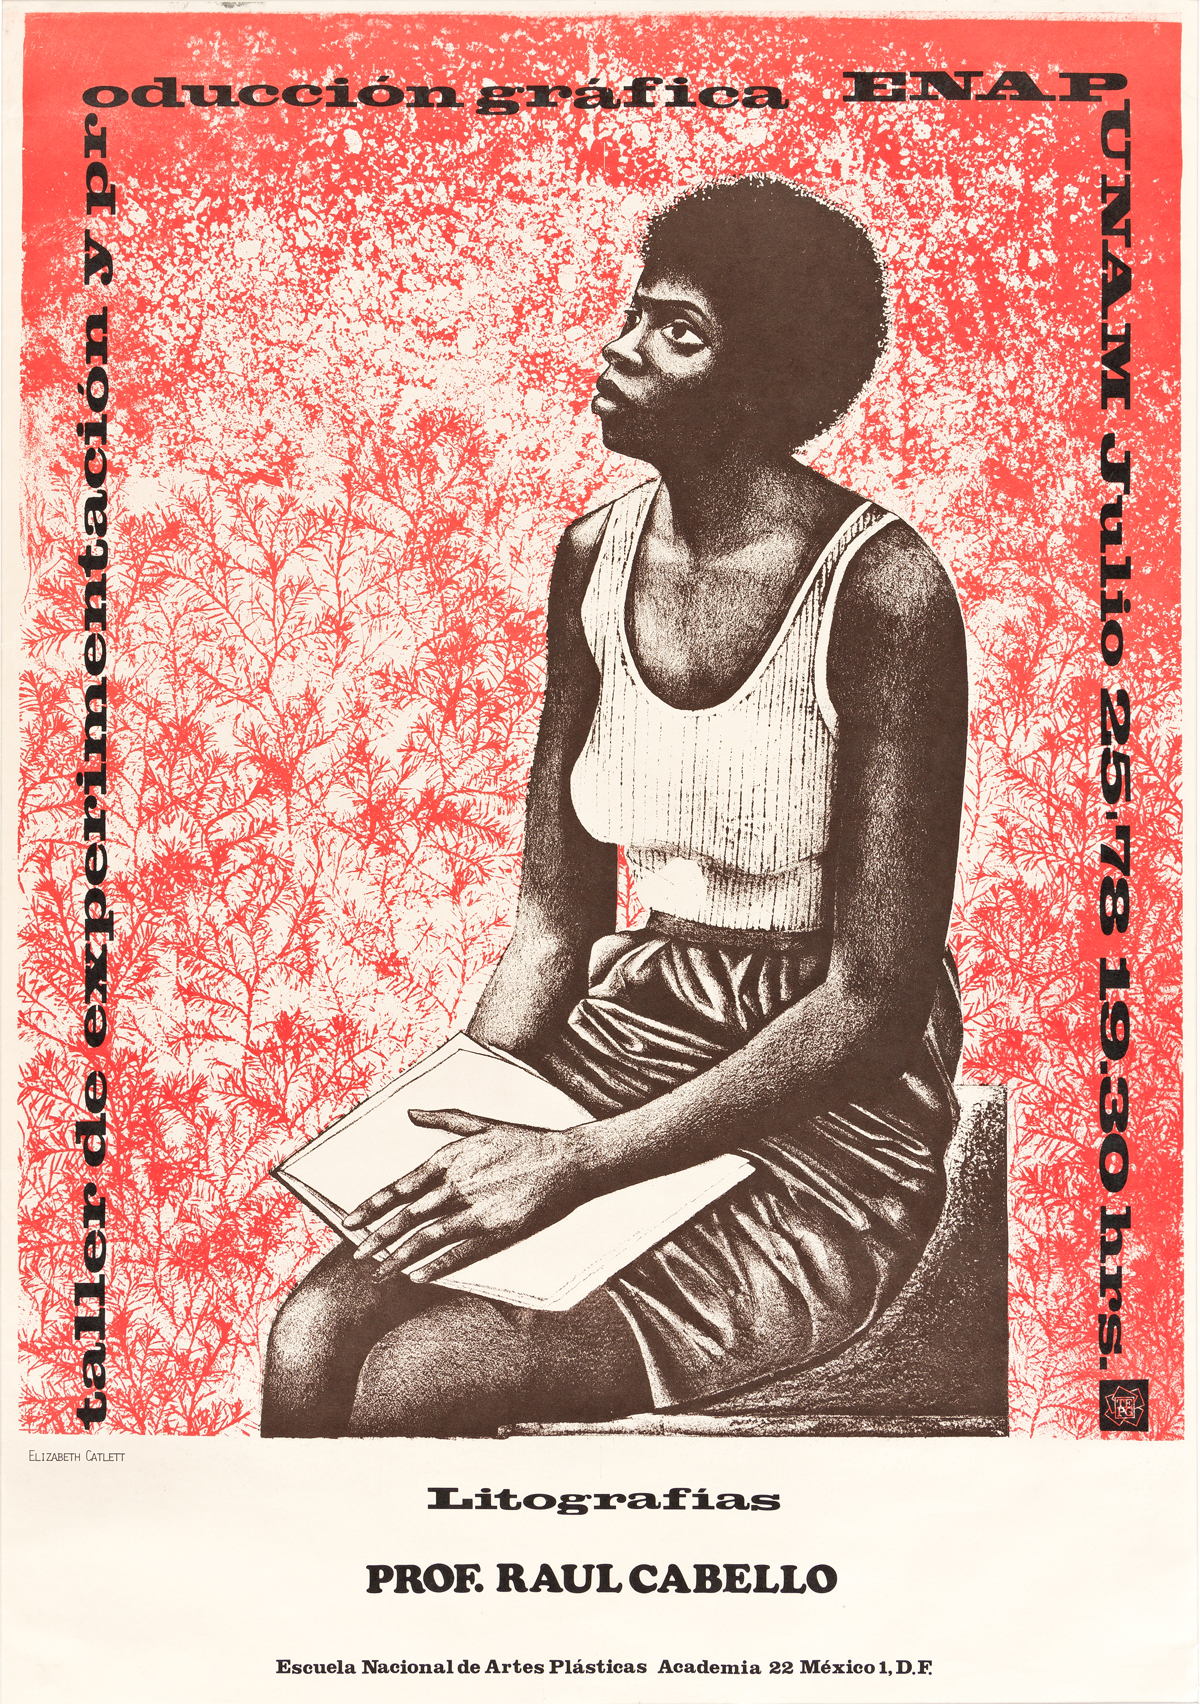 (ART.) Raul Cabello, printer. Poster featuring a work by his colleague Elizabeth Catlett.